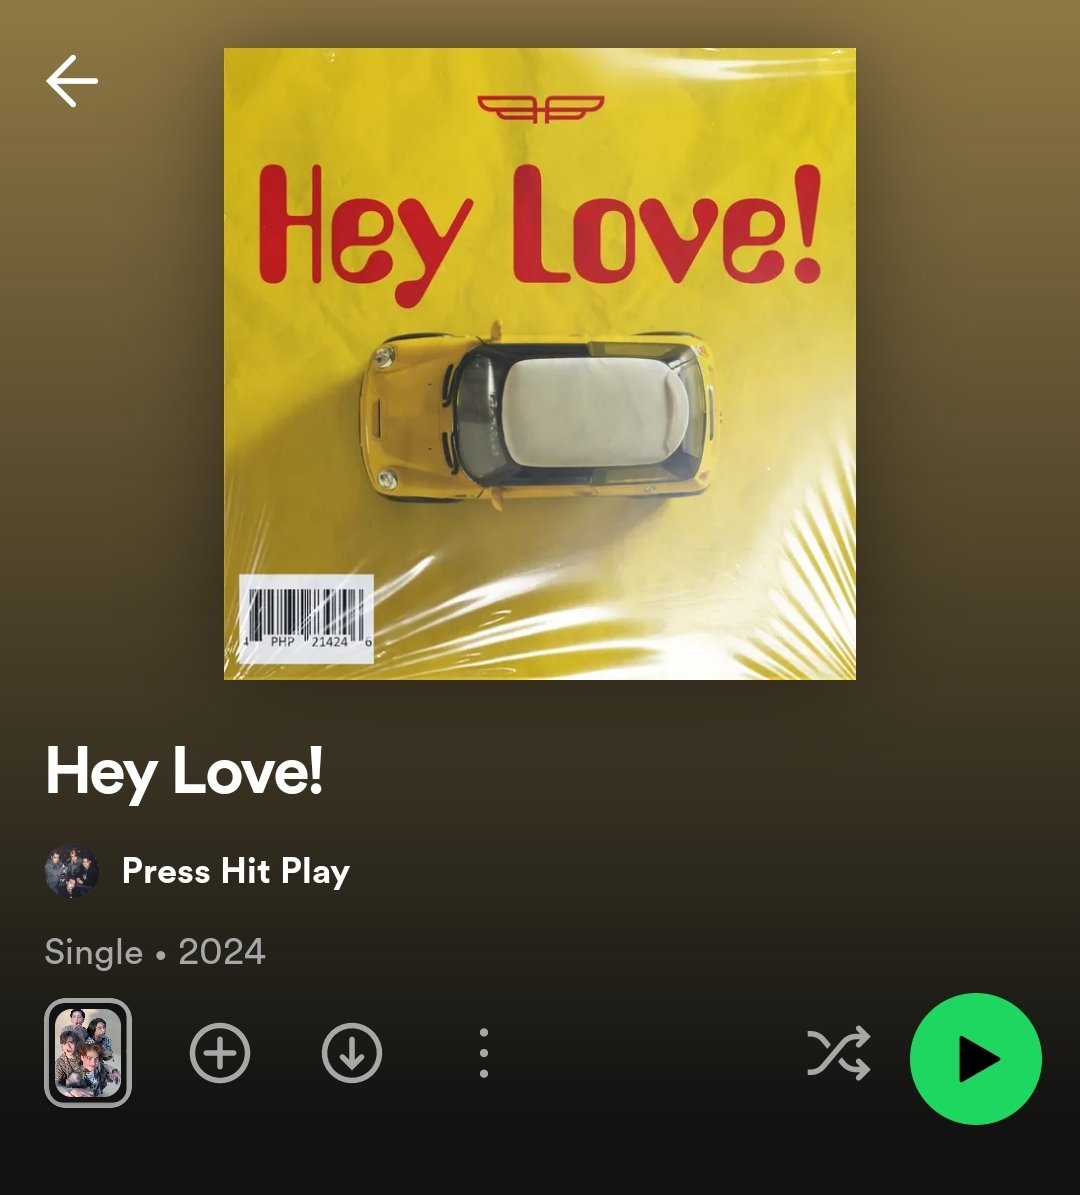 Good morning sa Press Hit Play, at sa Press Hit Play lamang! 

Stream 'Hey Love' by Press Hit Play on Spotify, and don't forget to use these hashtags 

PHP HEY LOVE OUT NOW
#HeyLoveOutNow #PHPHeyLove #PRESS_HIT_PLAY #PHP